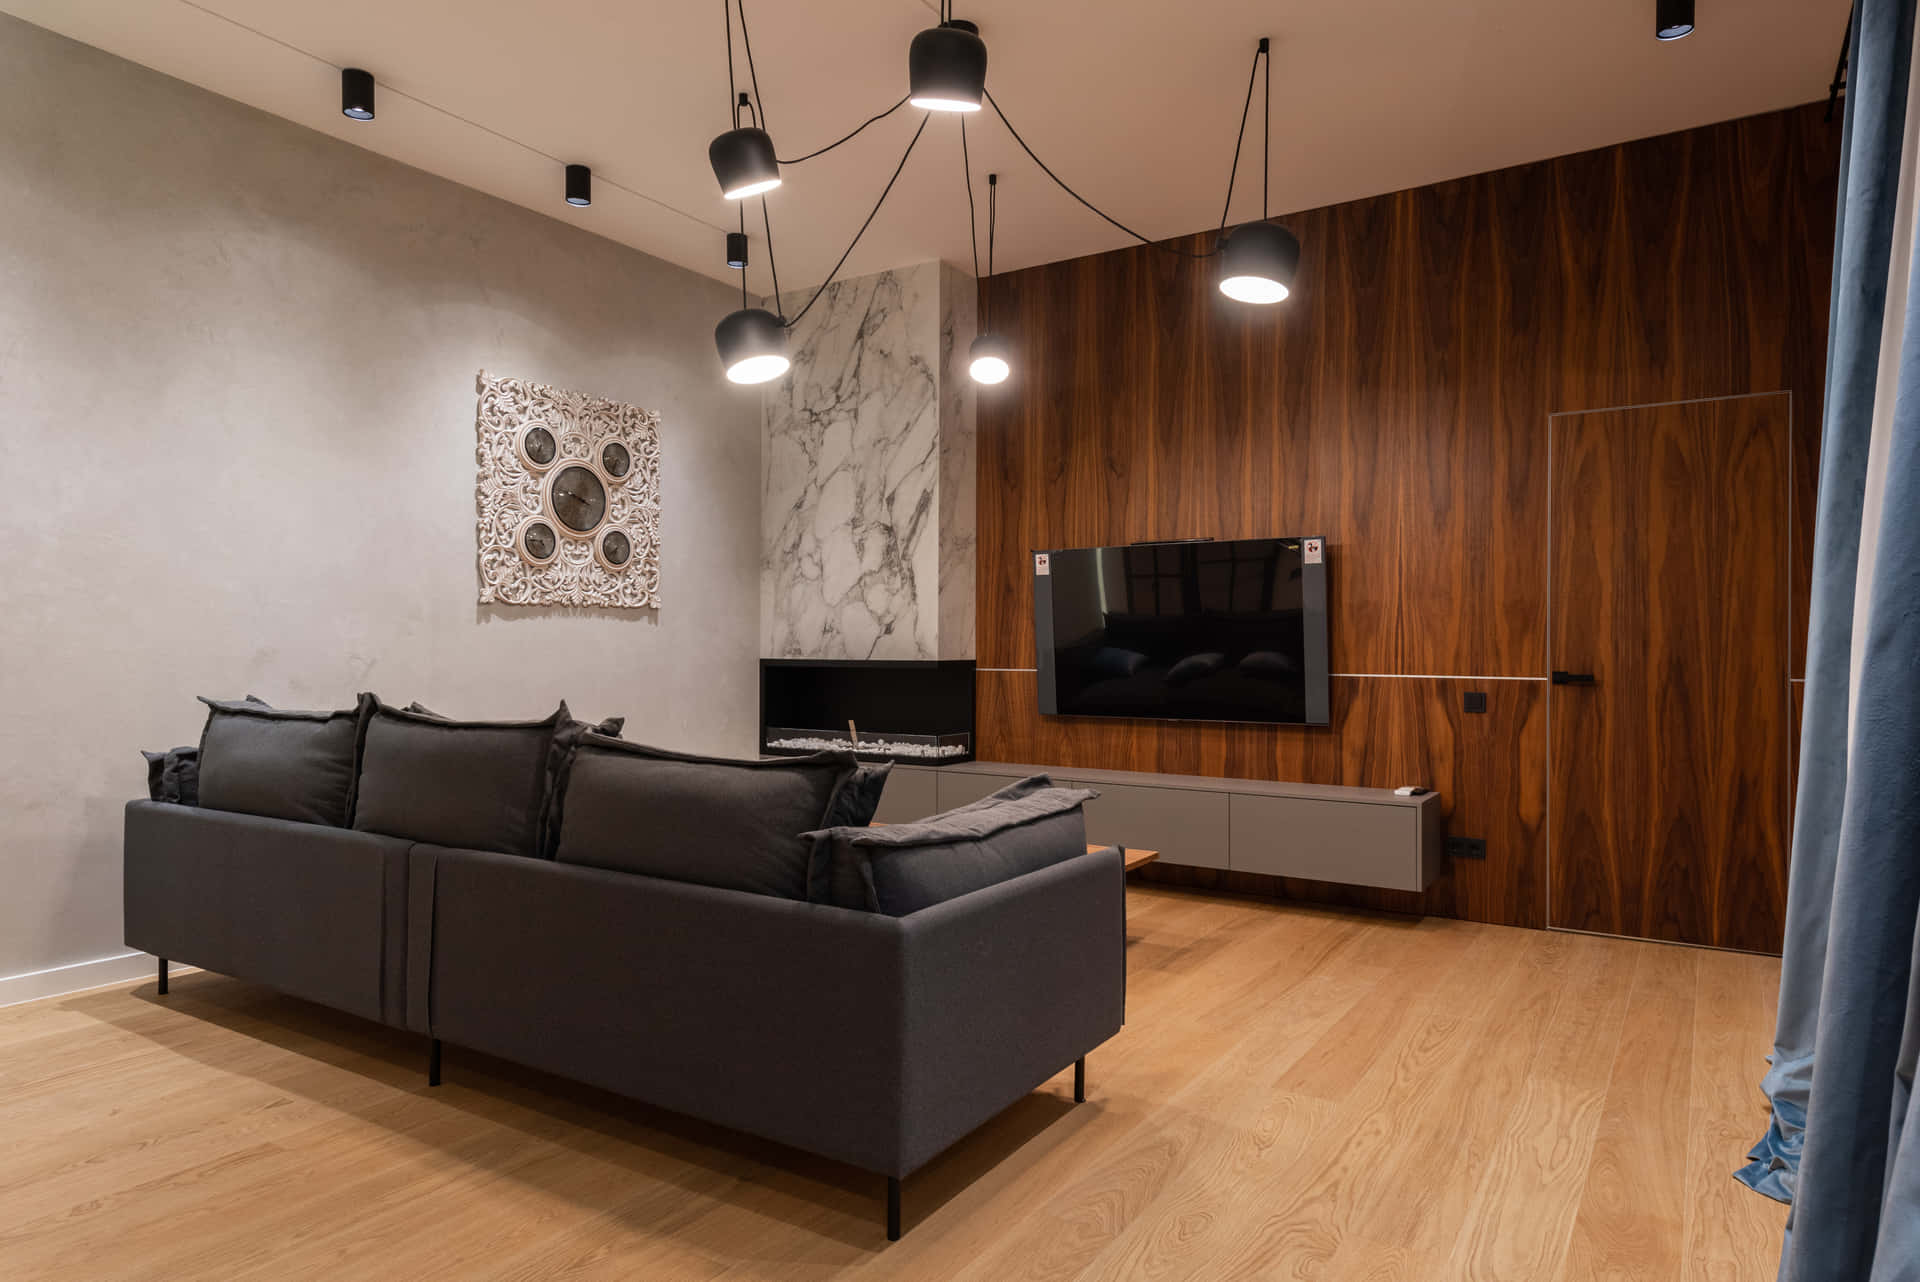 Modern Living Room With Wooden Walls And Wooden Flooring